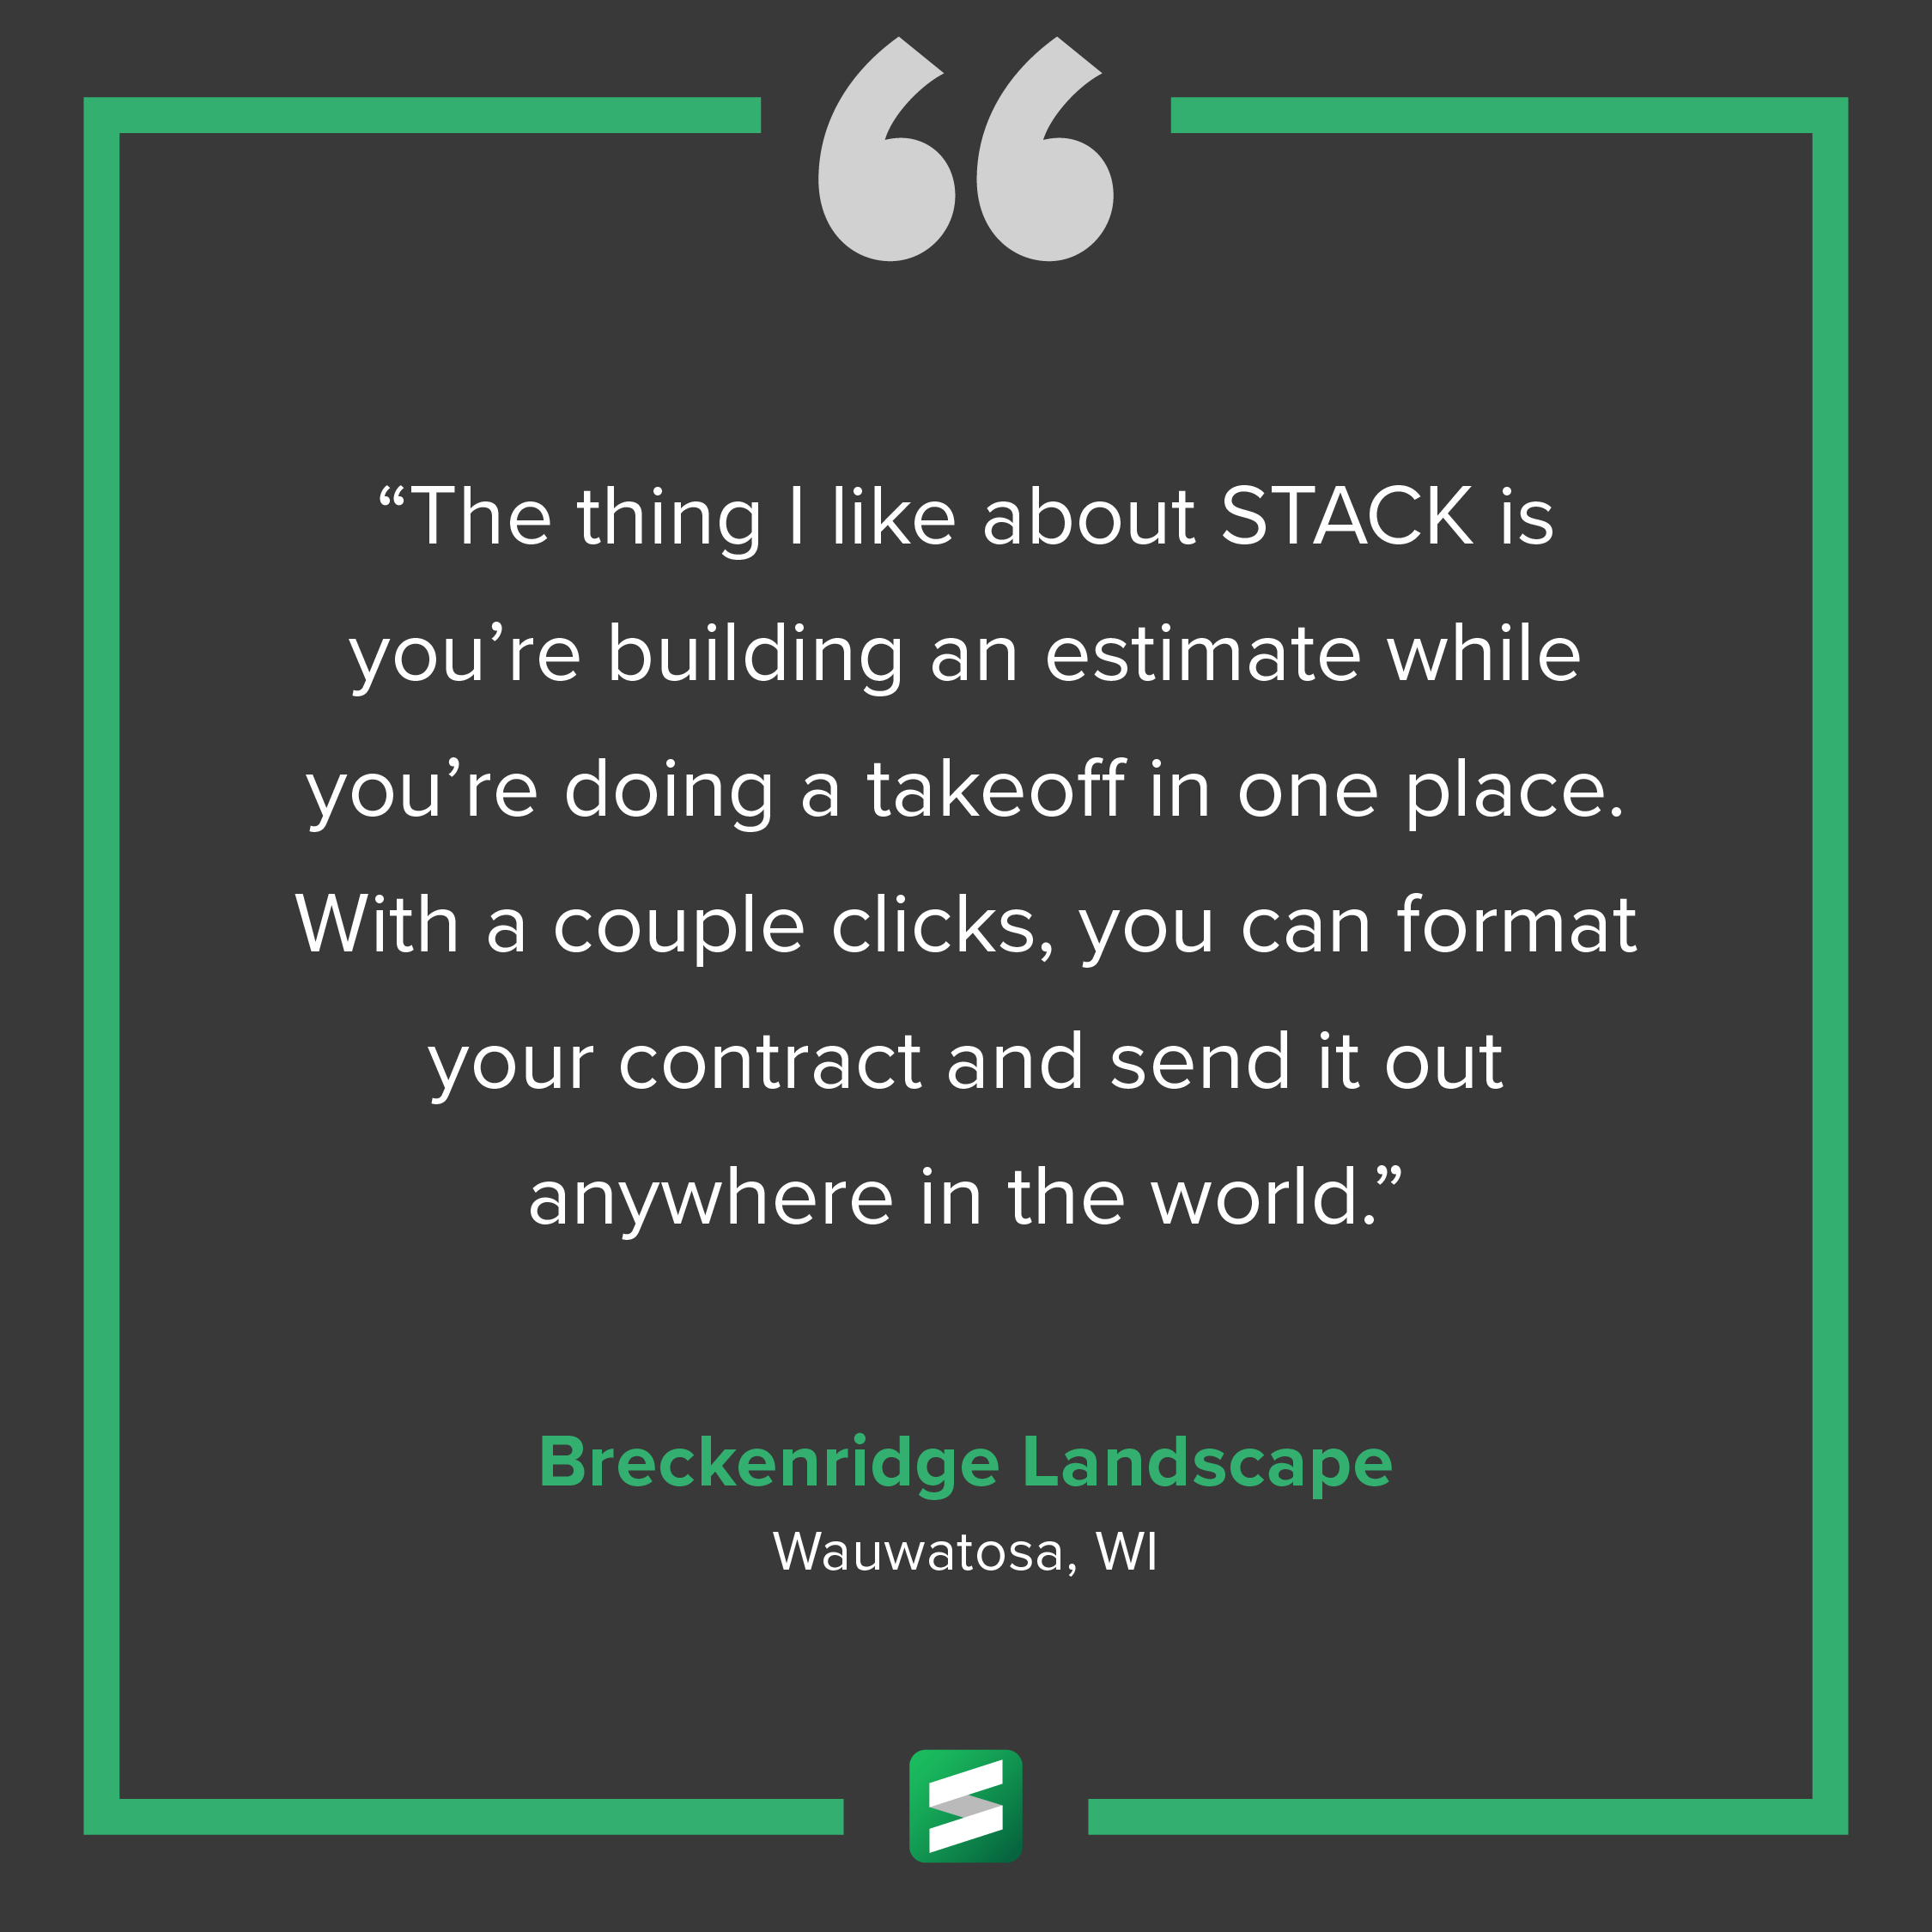 "The thing I like about STACK is you're building an estimate while you're doing a takeoff in one place. With a couple clicks, you can format your contract and send it out anywhere in the world." – Breckenridge Landscape, Wauwatosa, WI